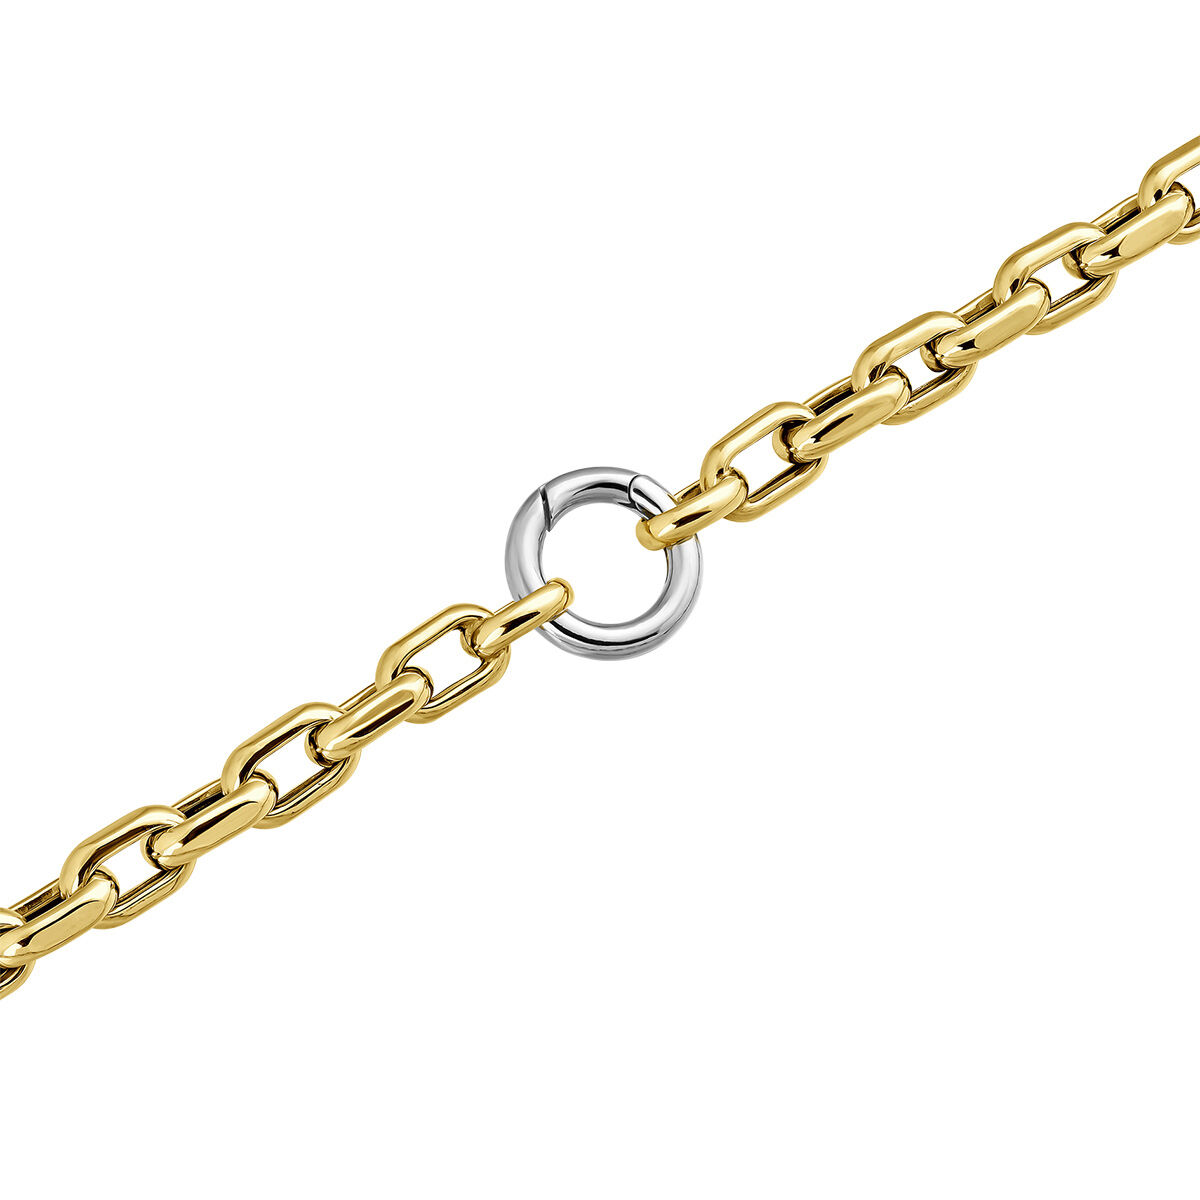 Cable link chain in 18k yellow gold-plated silver, J05336-02-45, hi-res